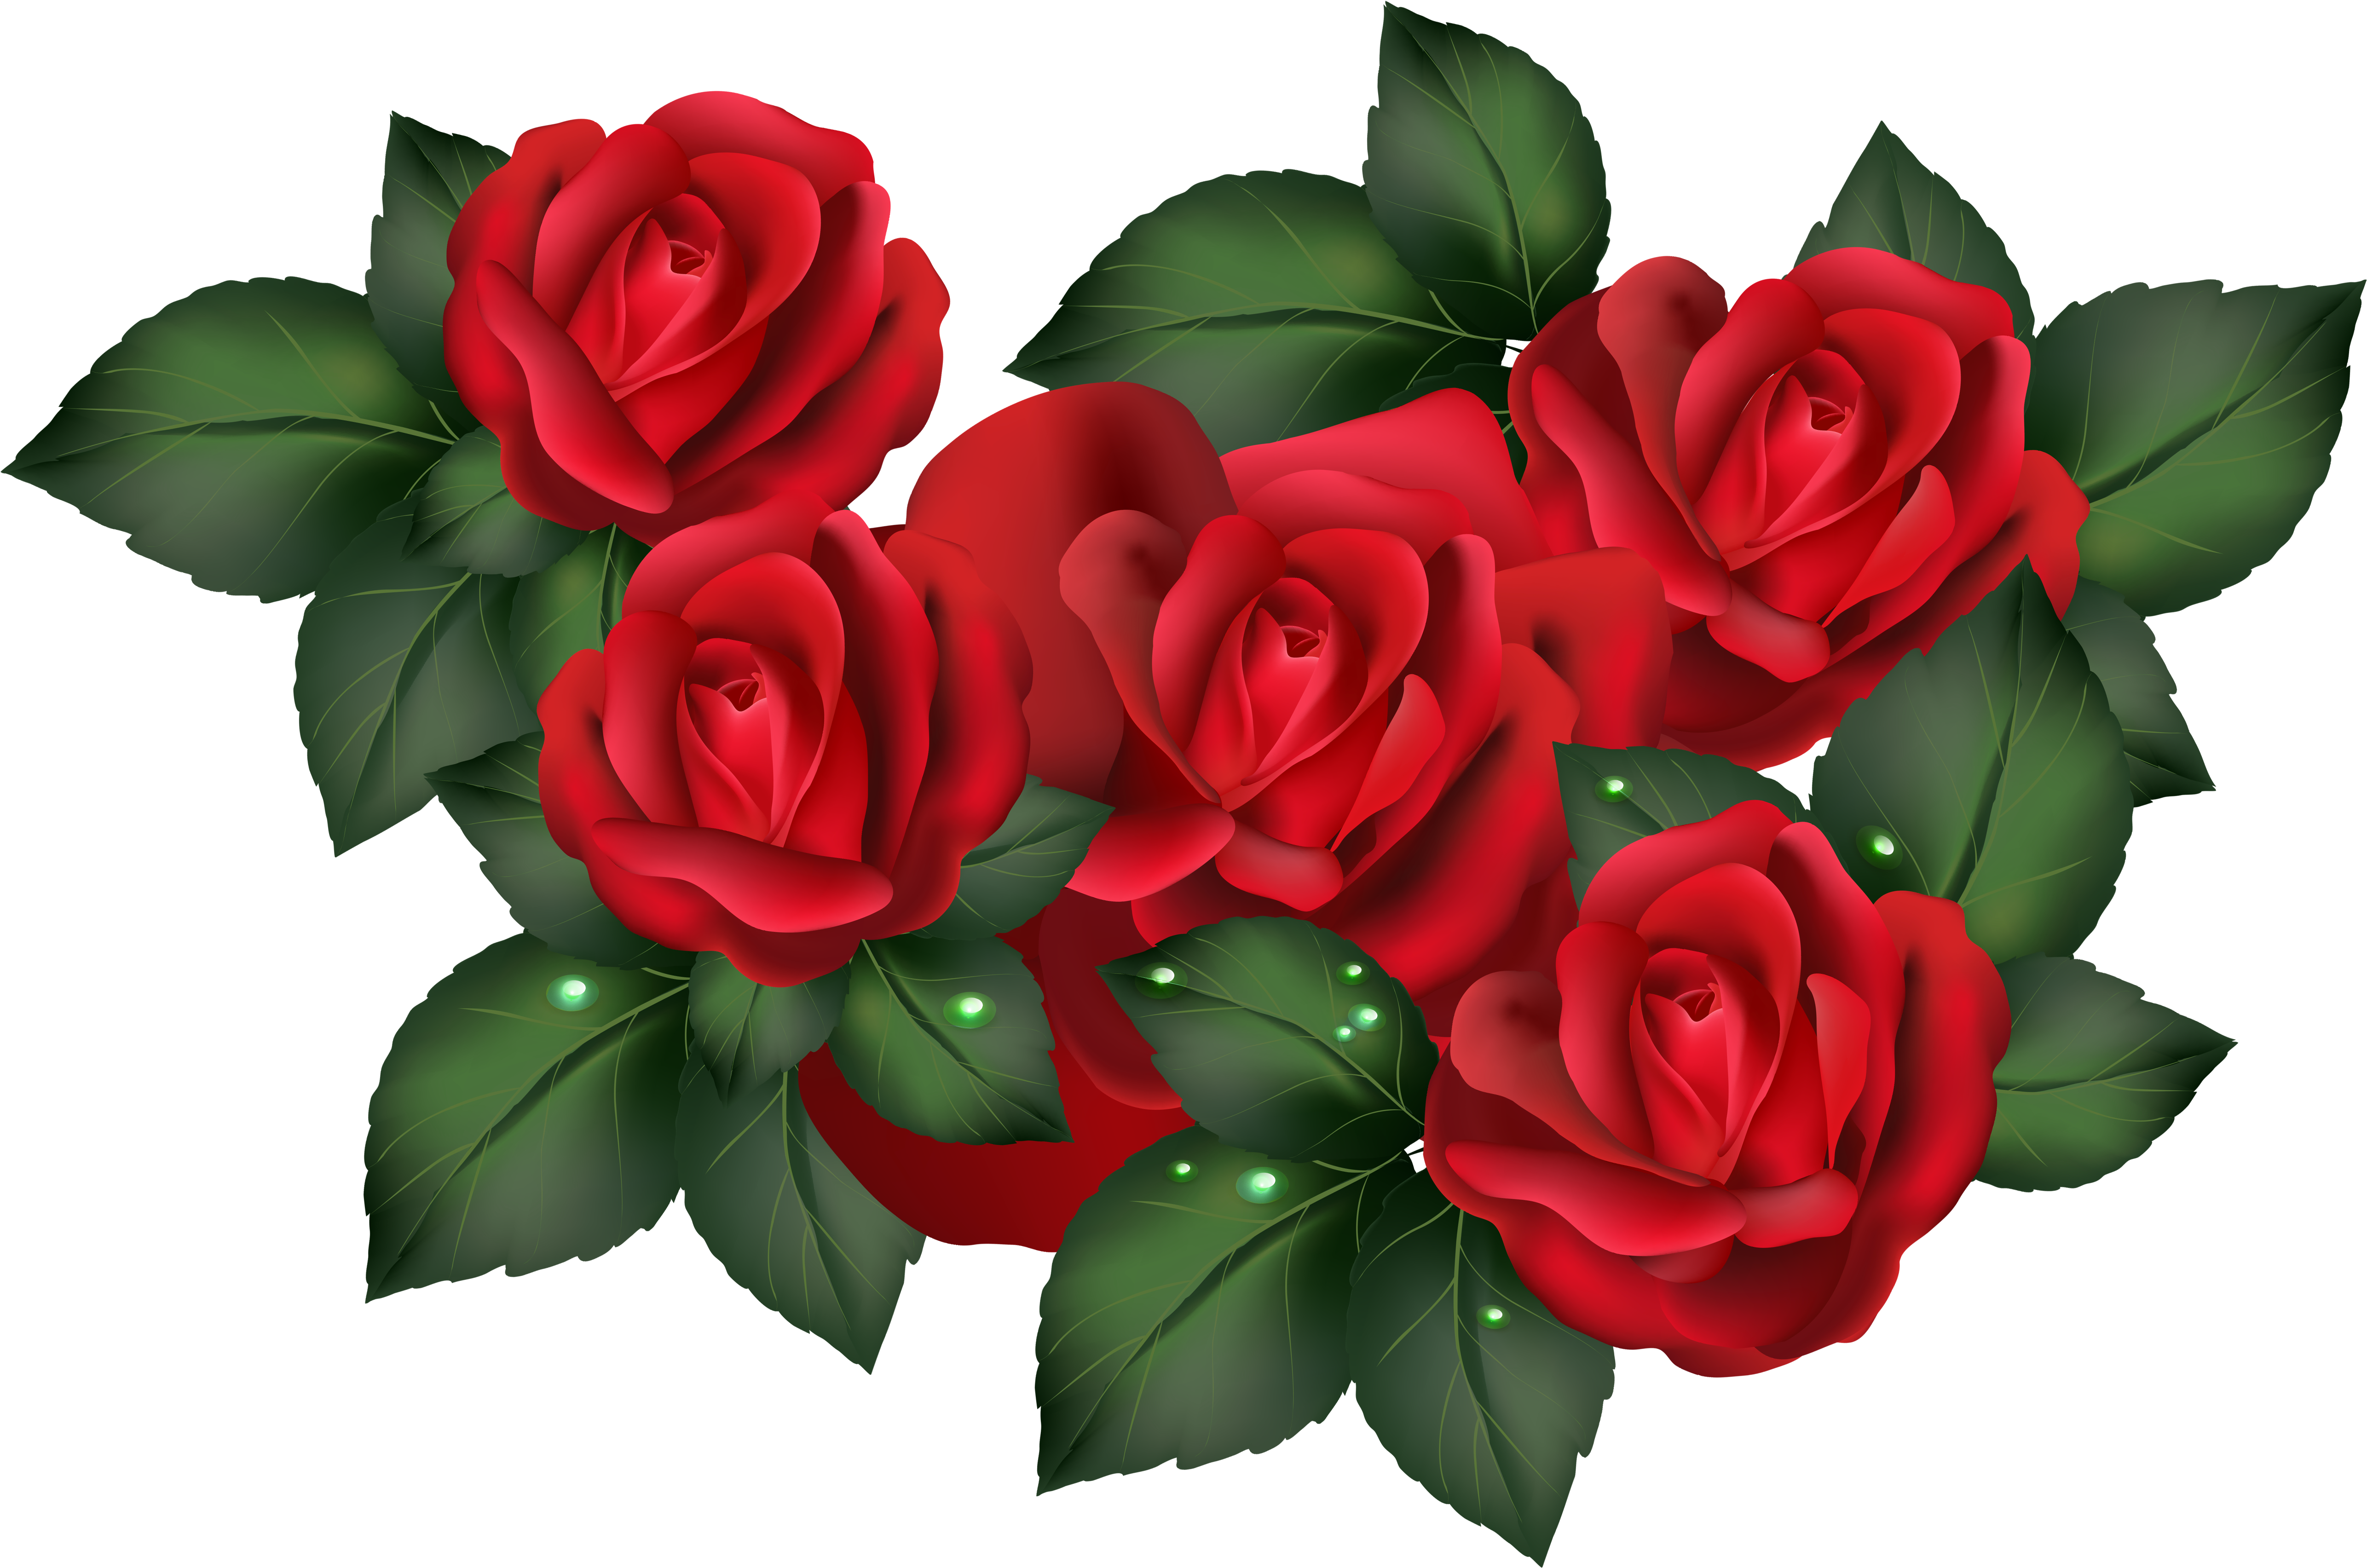 A Group Of Red Roses With Green Leaves